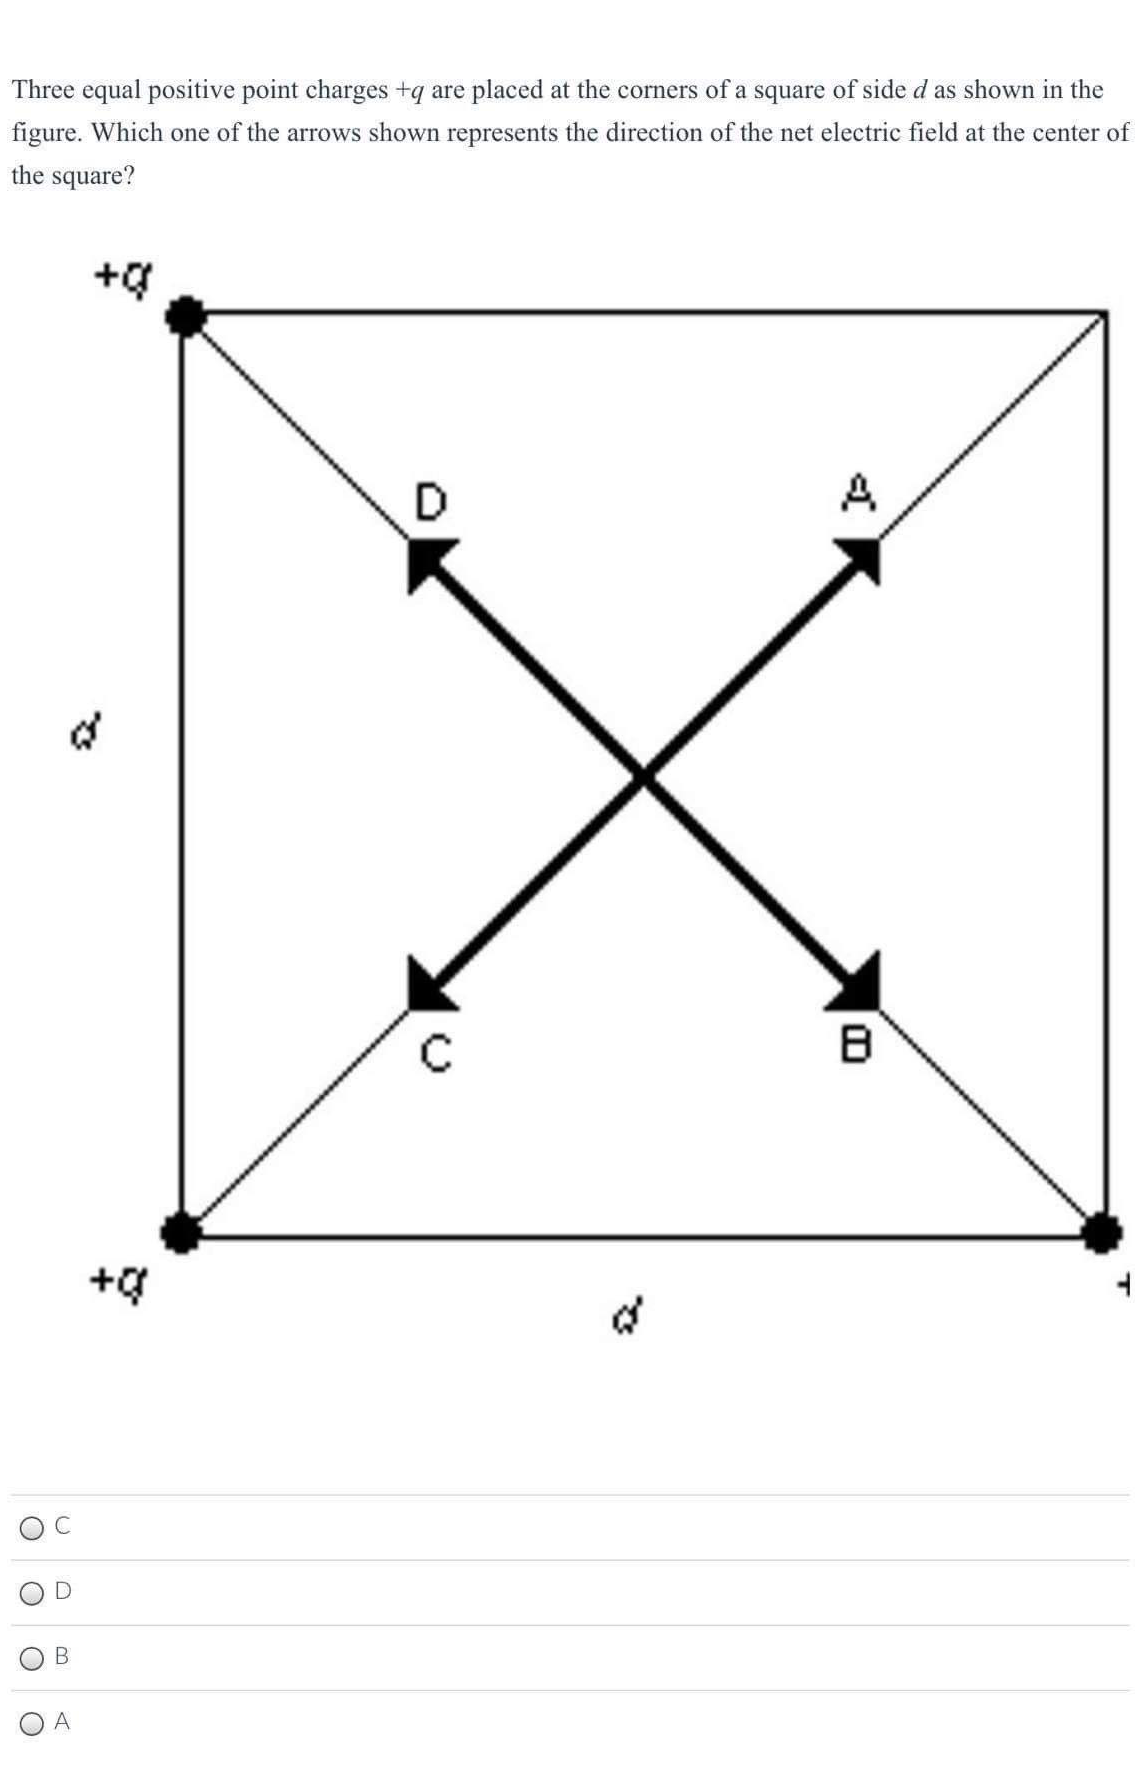 Three equal positive point charges +q are placed at the corners of a square of side d as shown in the
figure. Which one of the arrows shown represents the direction of the net electric field at the center of
the square?
D
A
+g
B
O A
of
